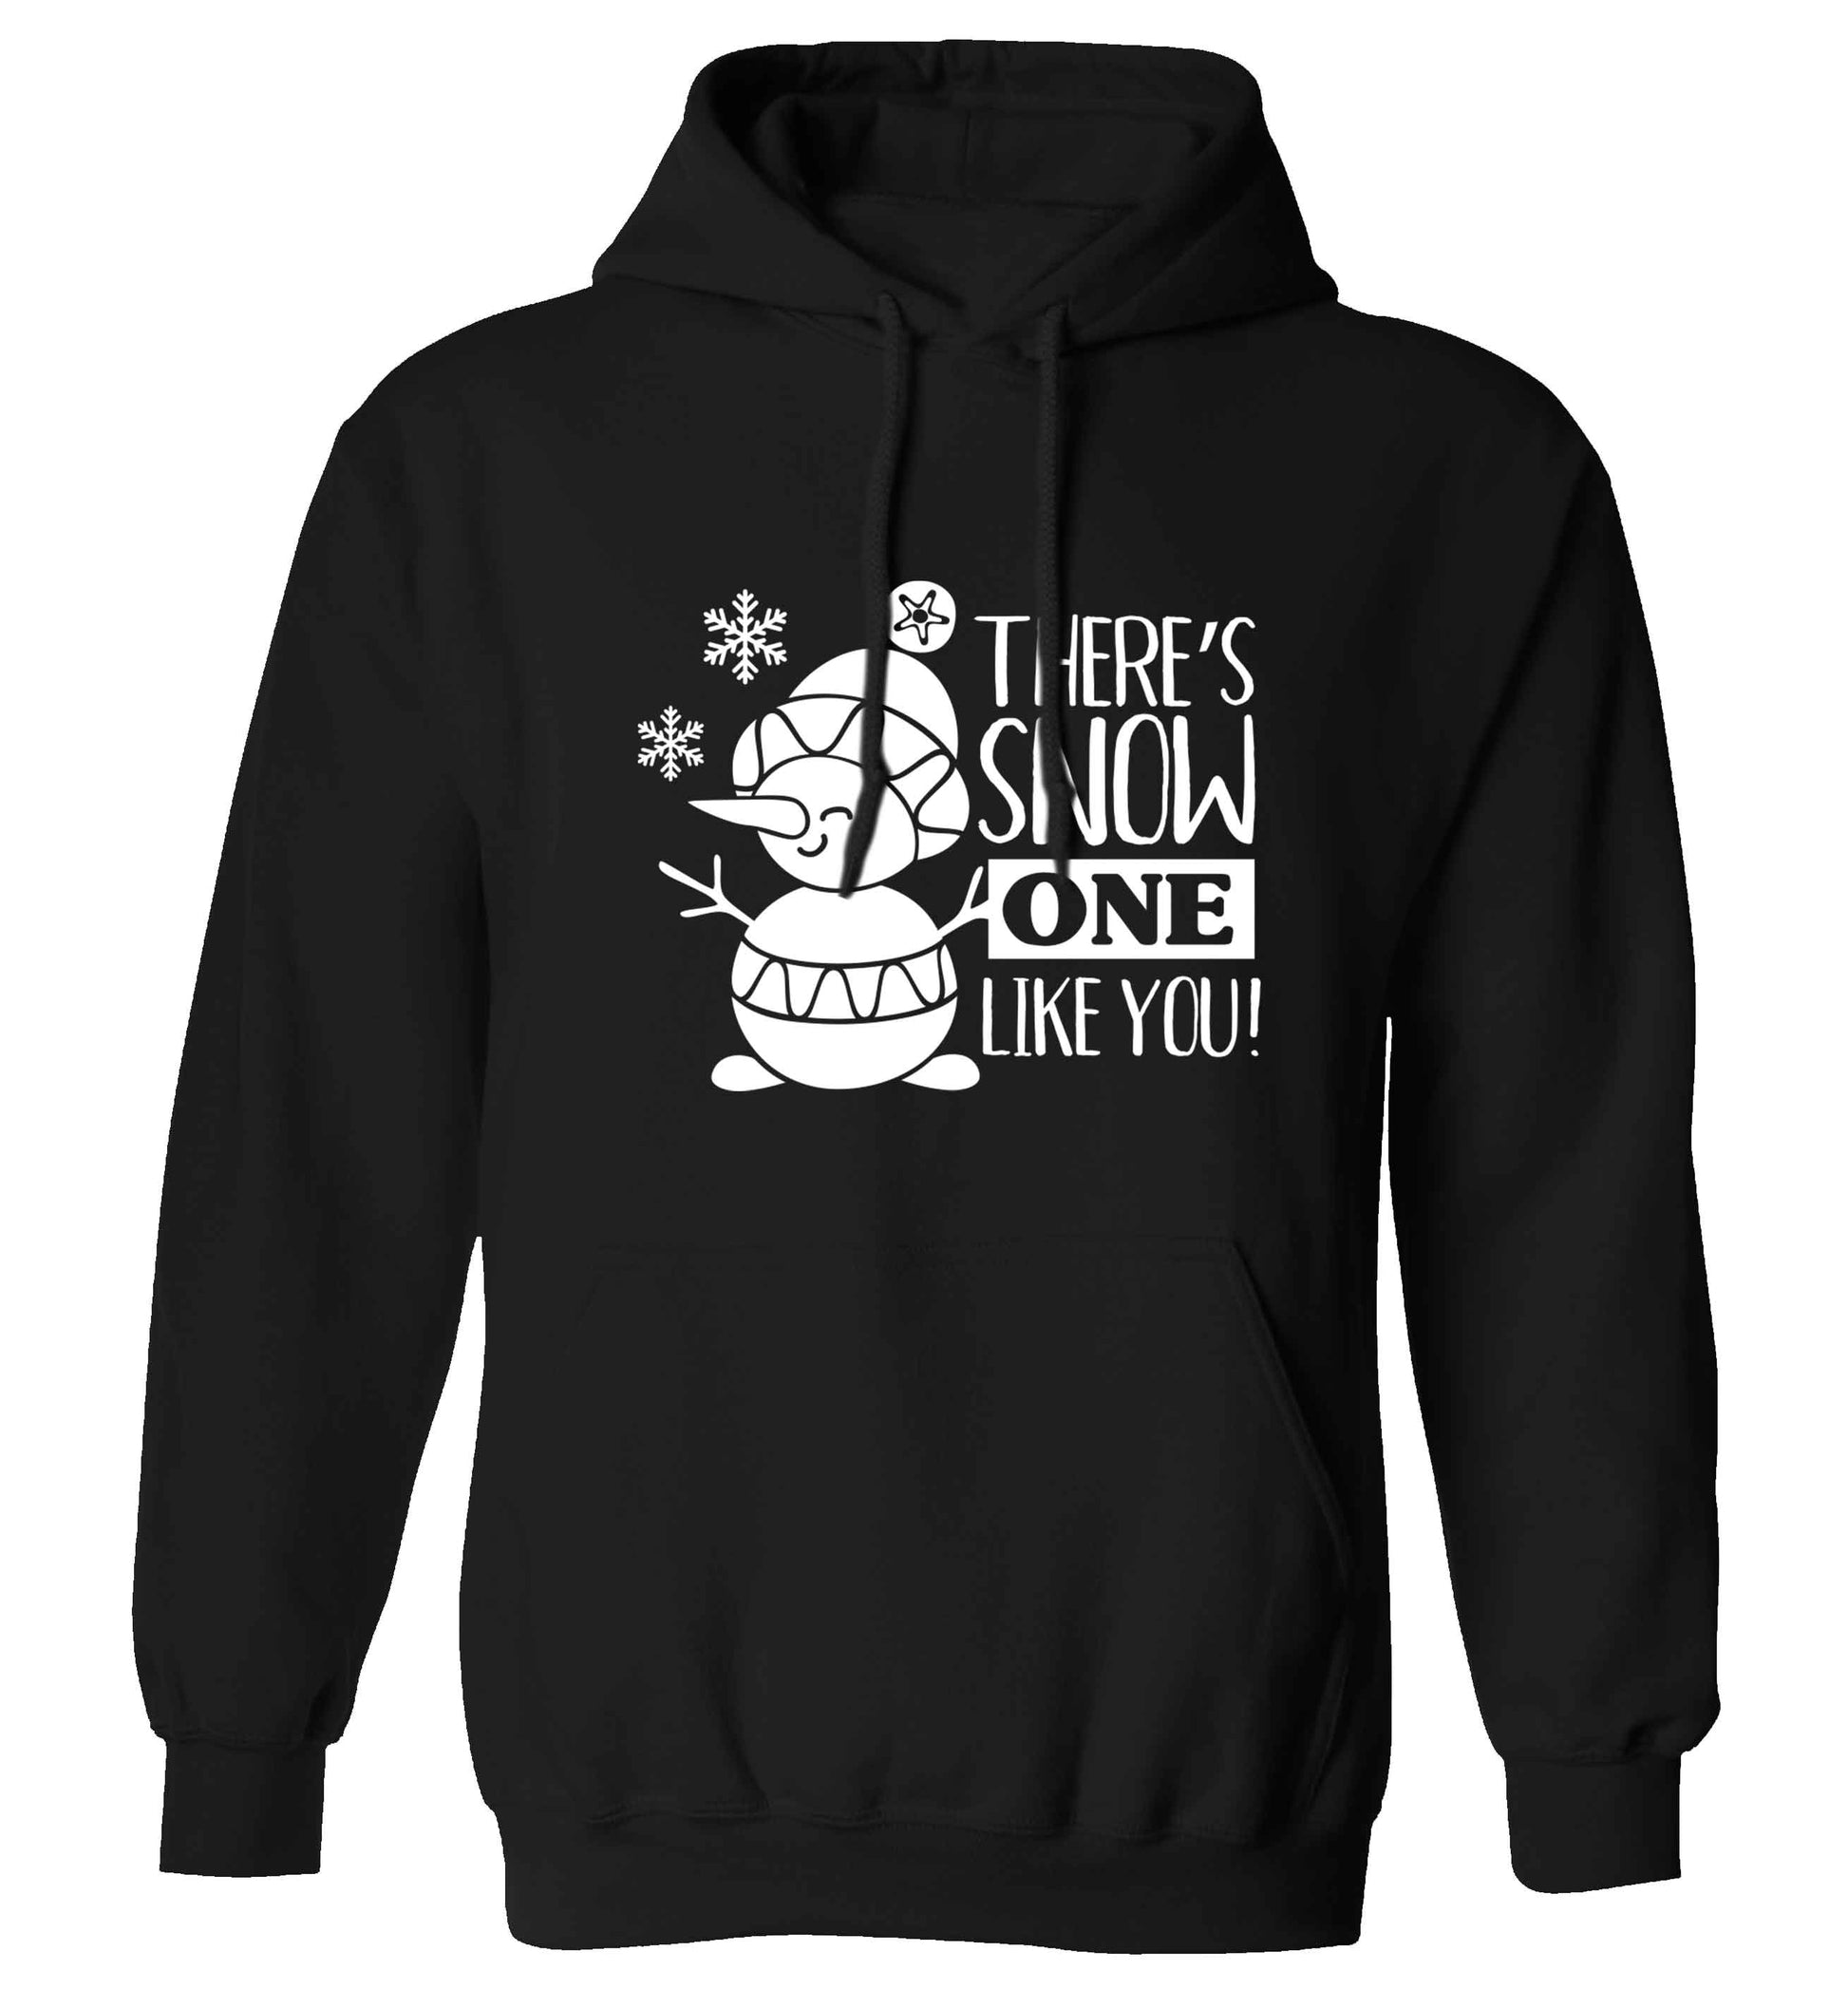 There's snow one like you adults unisex black hoodie 2XL